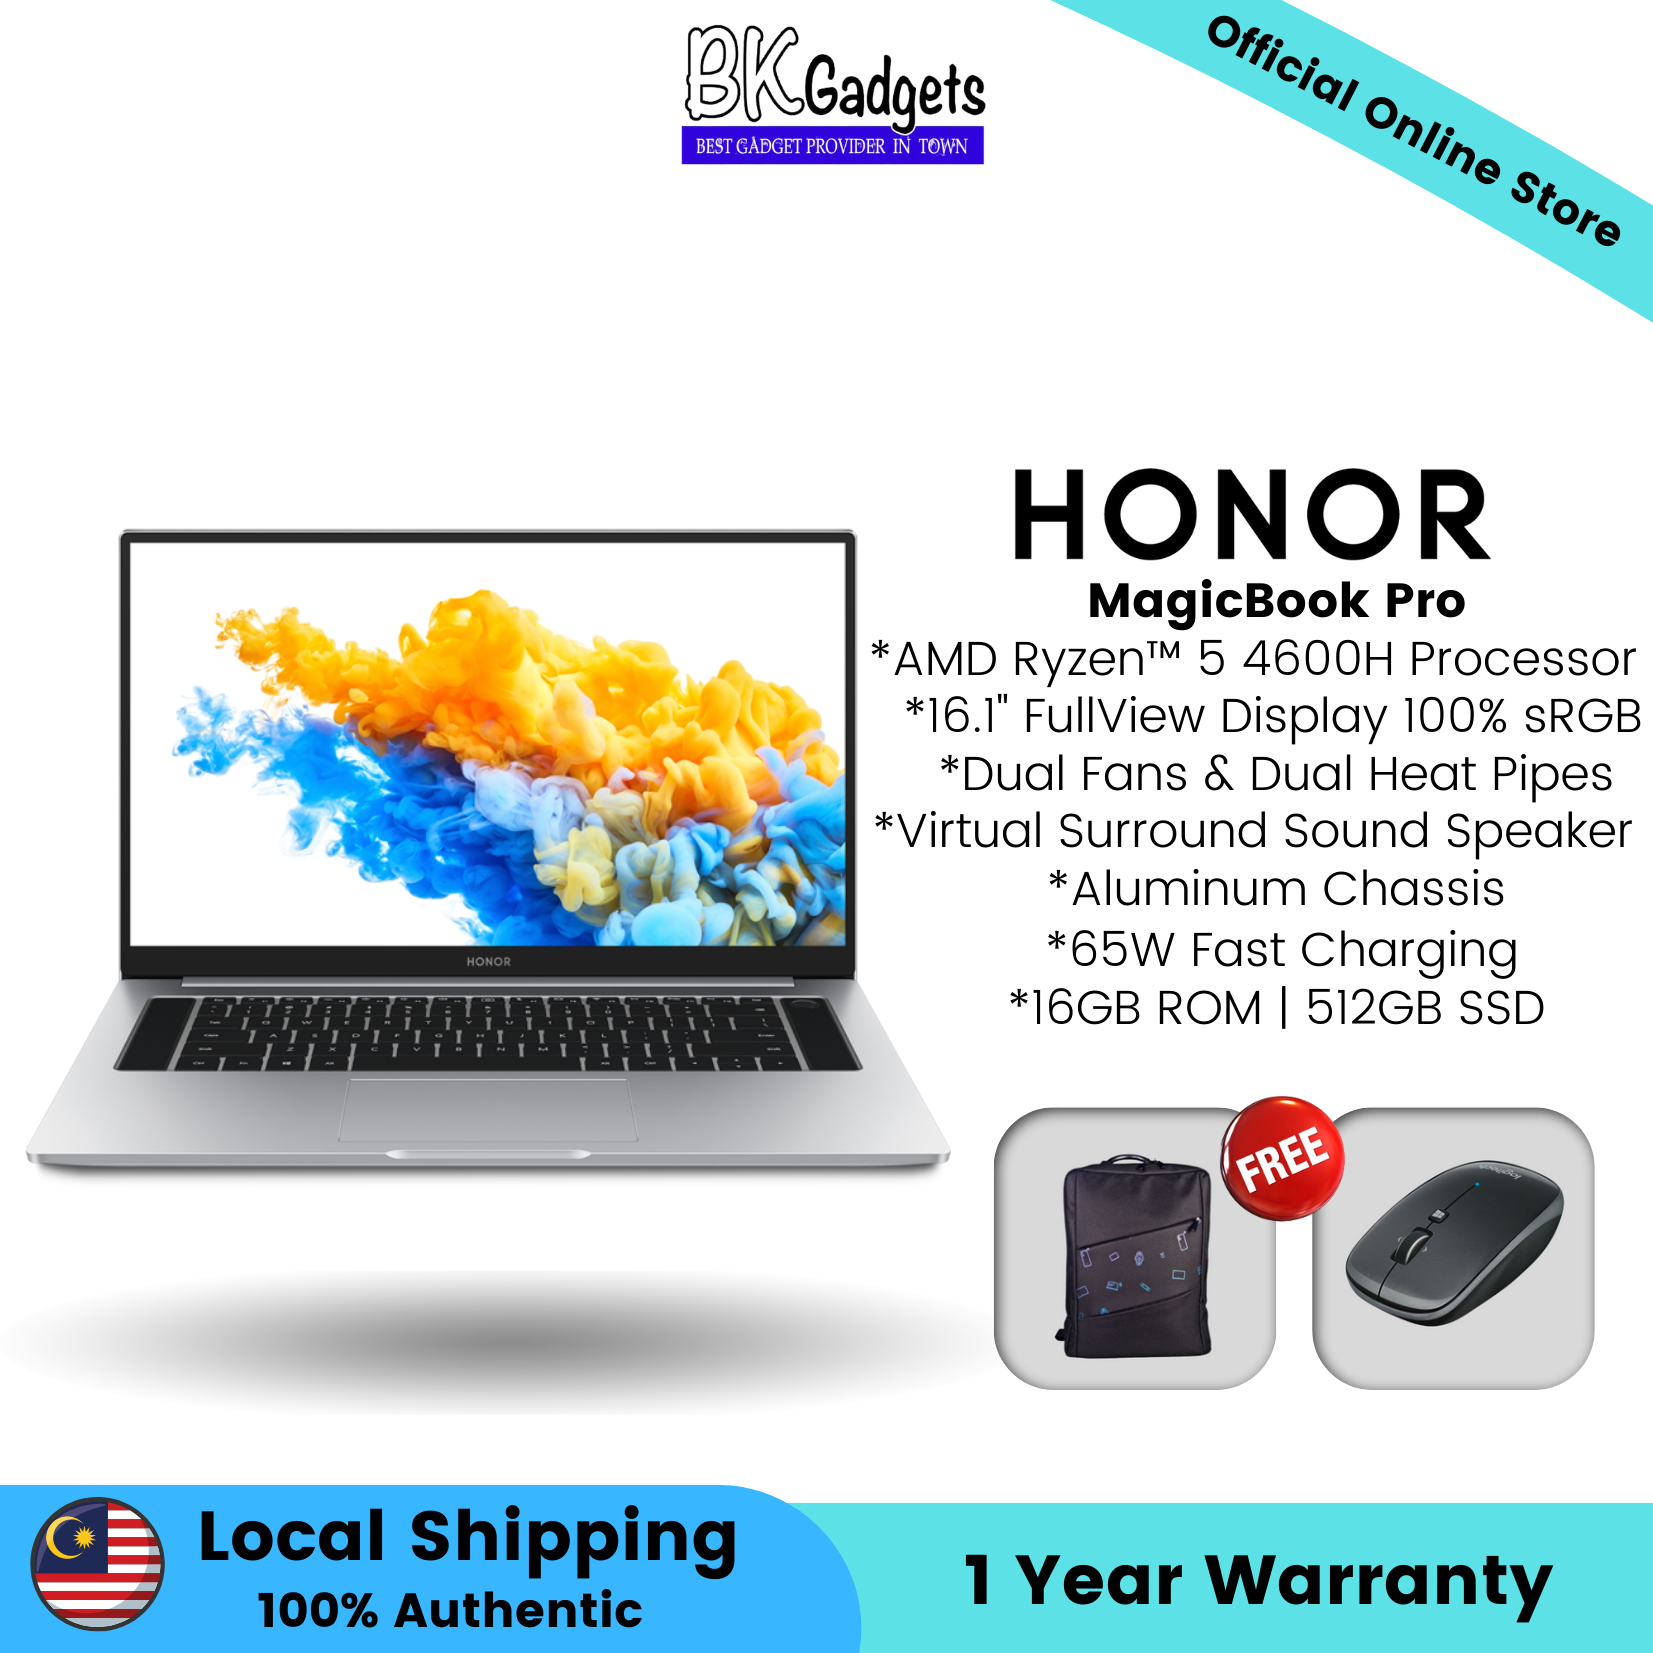 Honor MagicBook Pro (16GB + 512GB) - 16.1Inch FullView Display | Dual Fans & Dual Heat Pipes | 65W Fast Charging